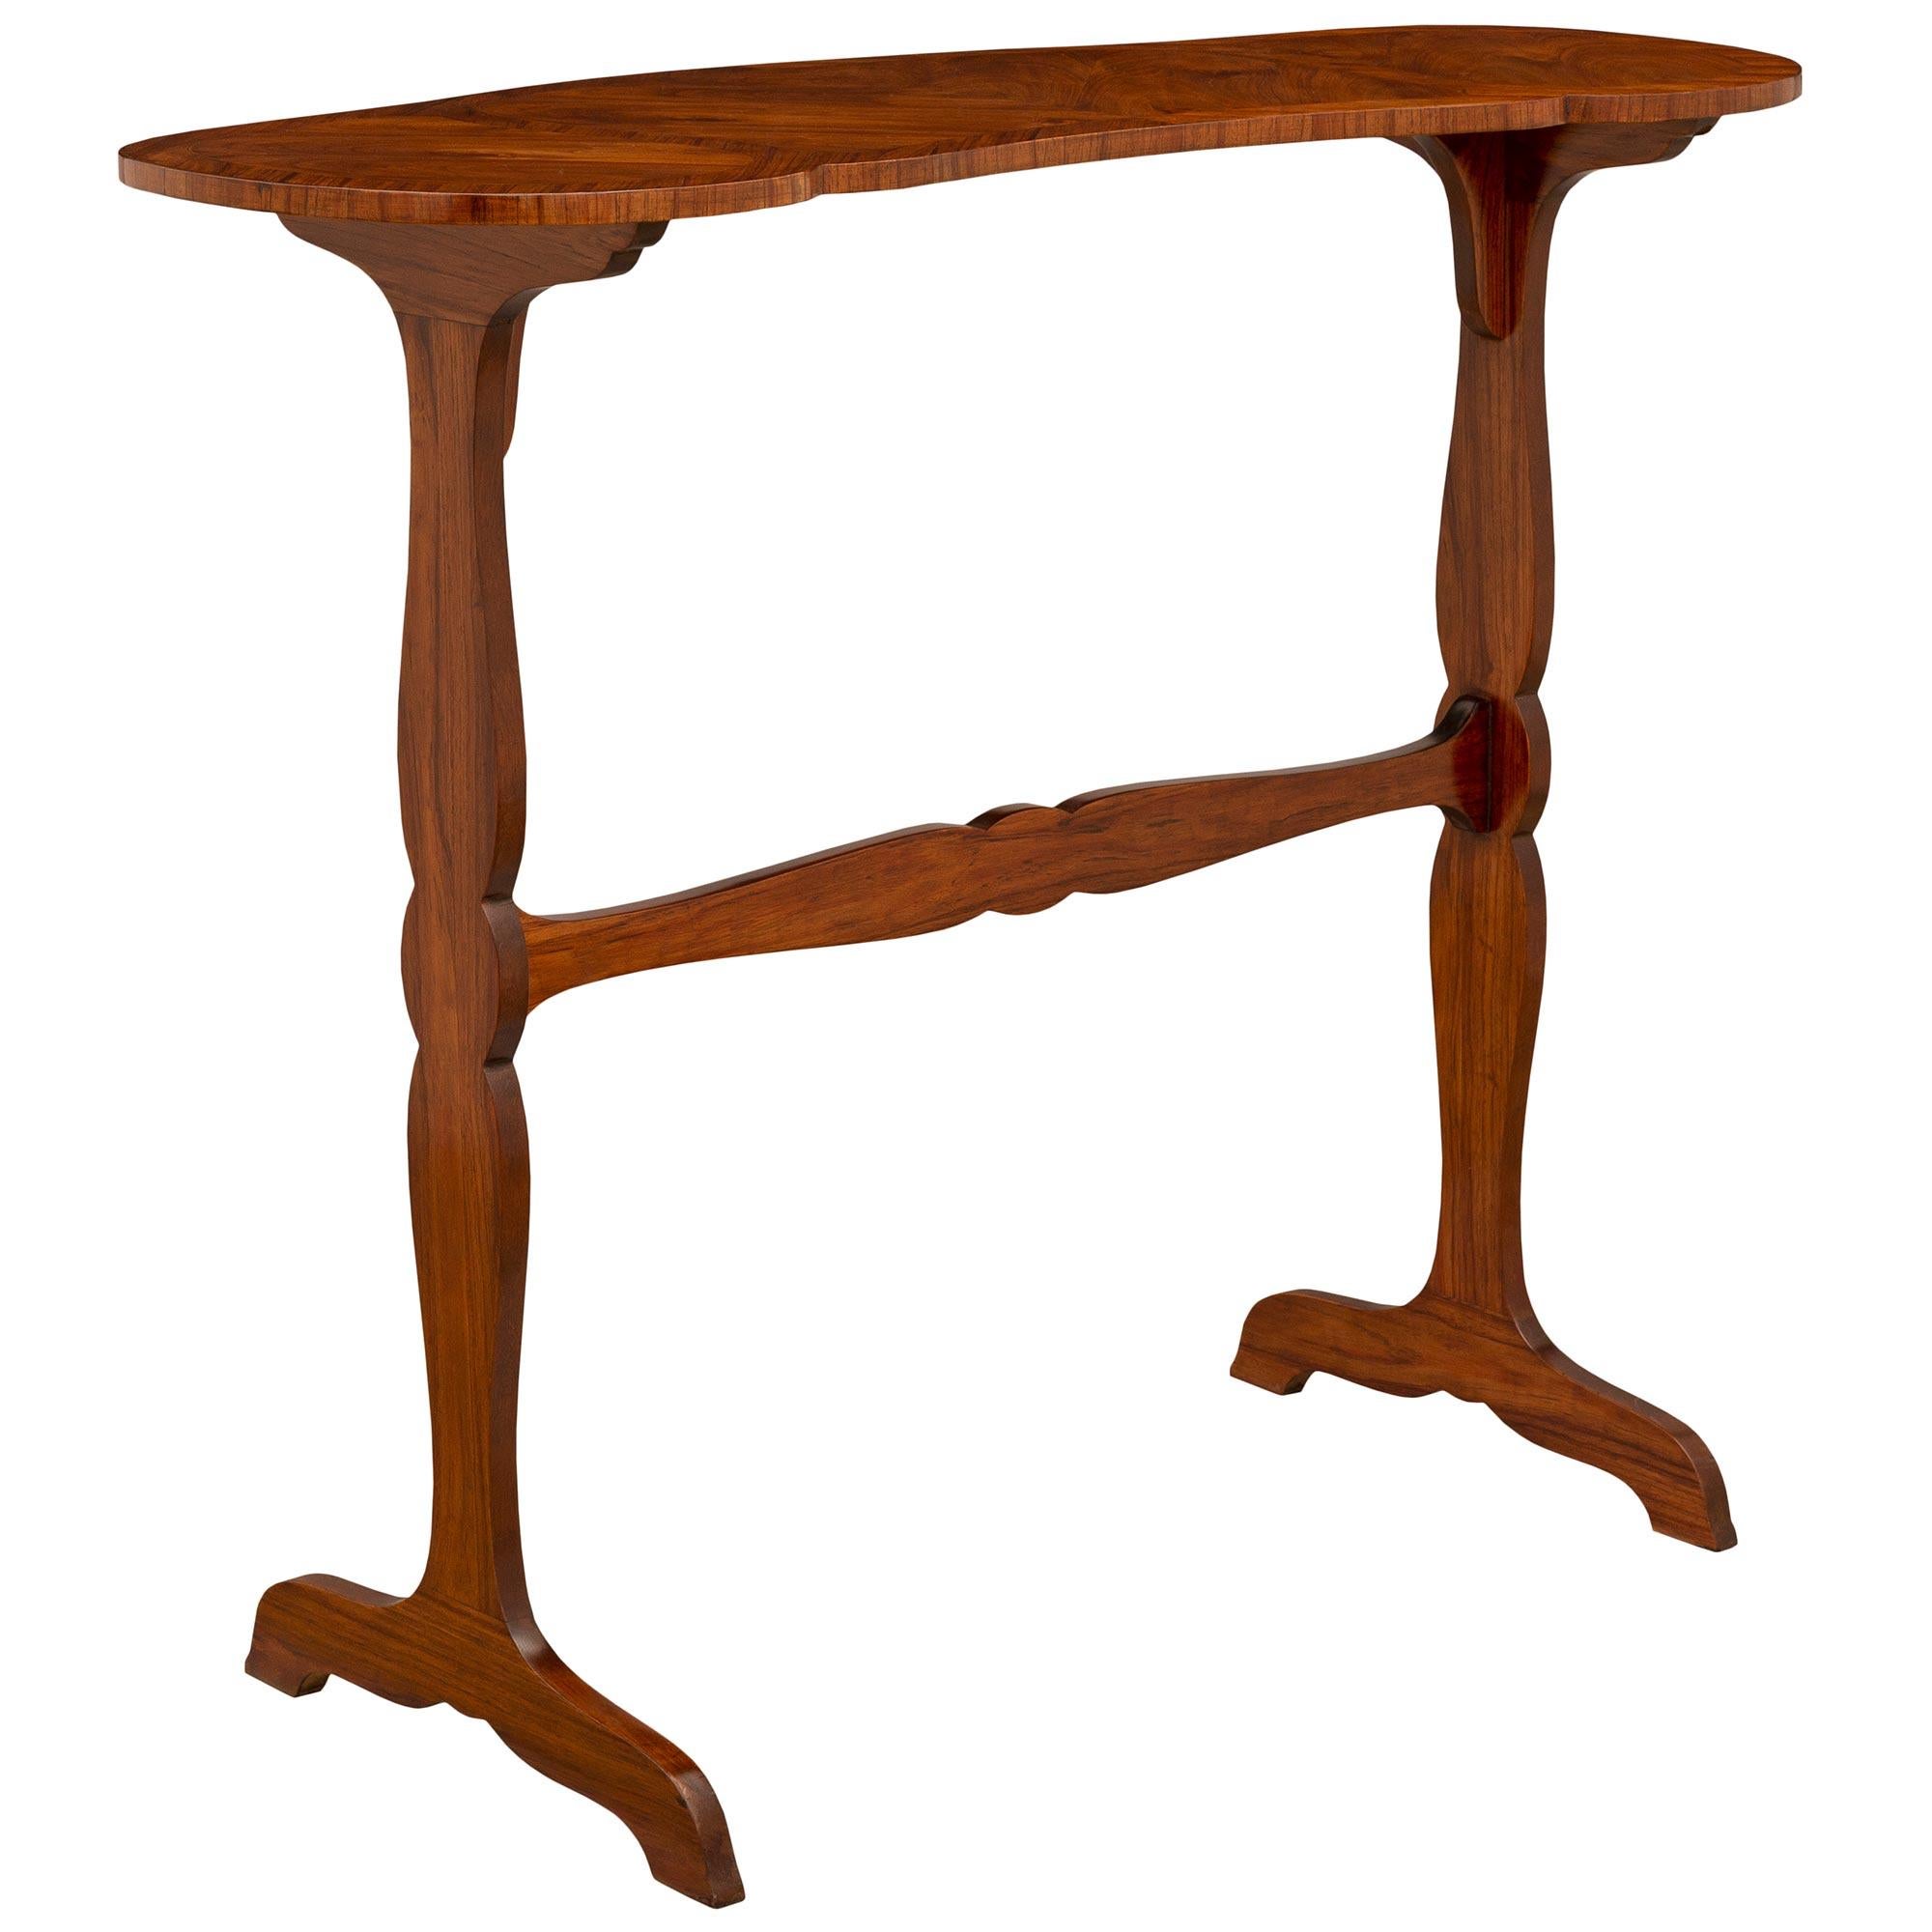 French 19th Century Louis XV Style Tulipwood Kidney Shape Table In Good Condition For Sale In West Palm Beach, FL